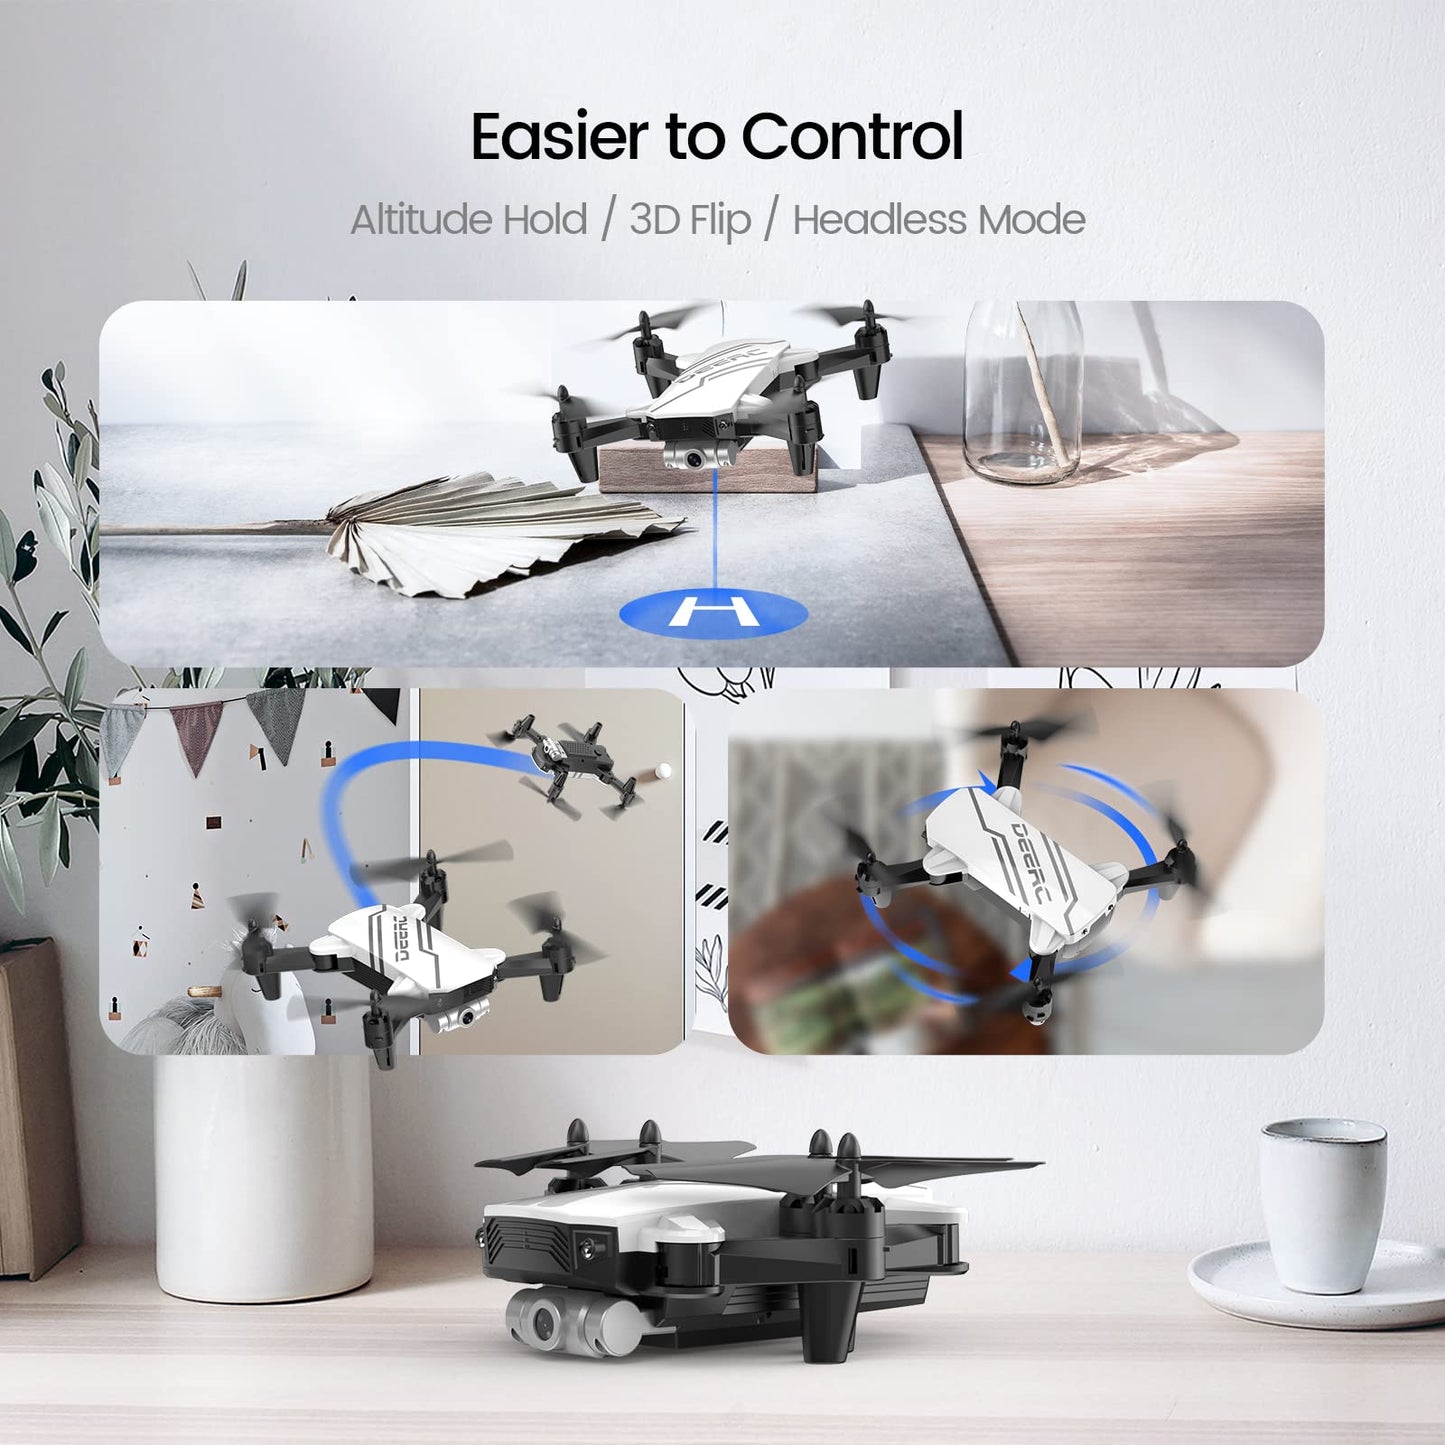 DEERC D20 Mini Drone with Camera for Kids,